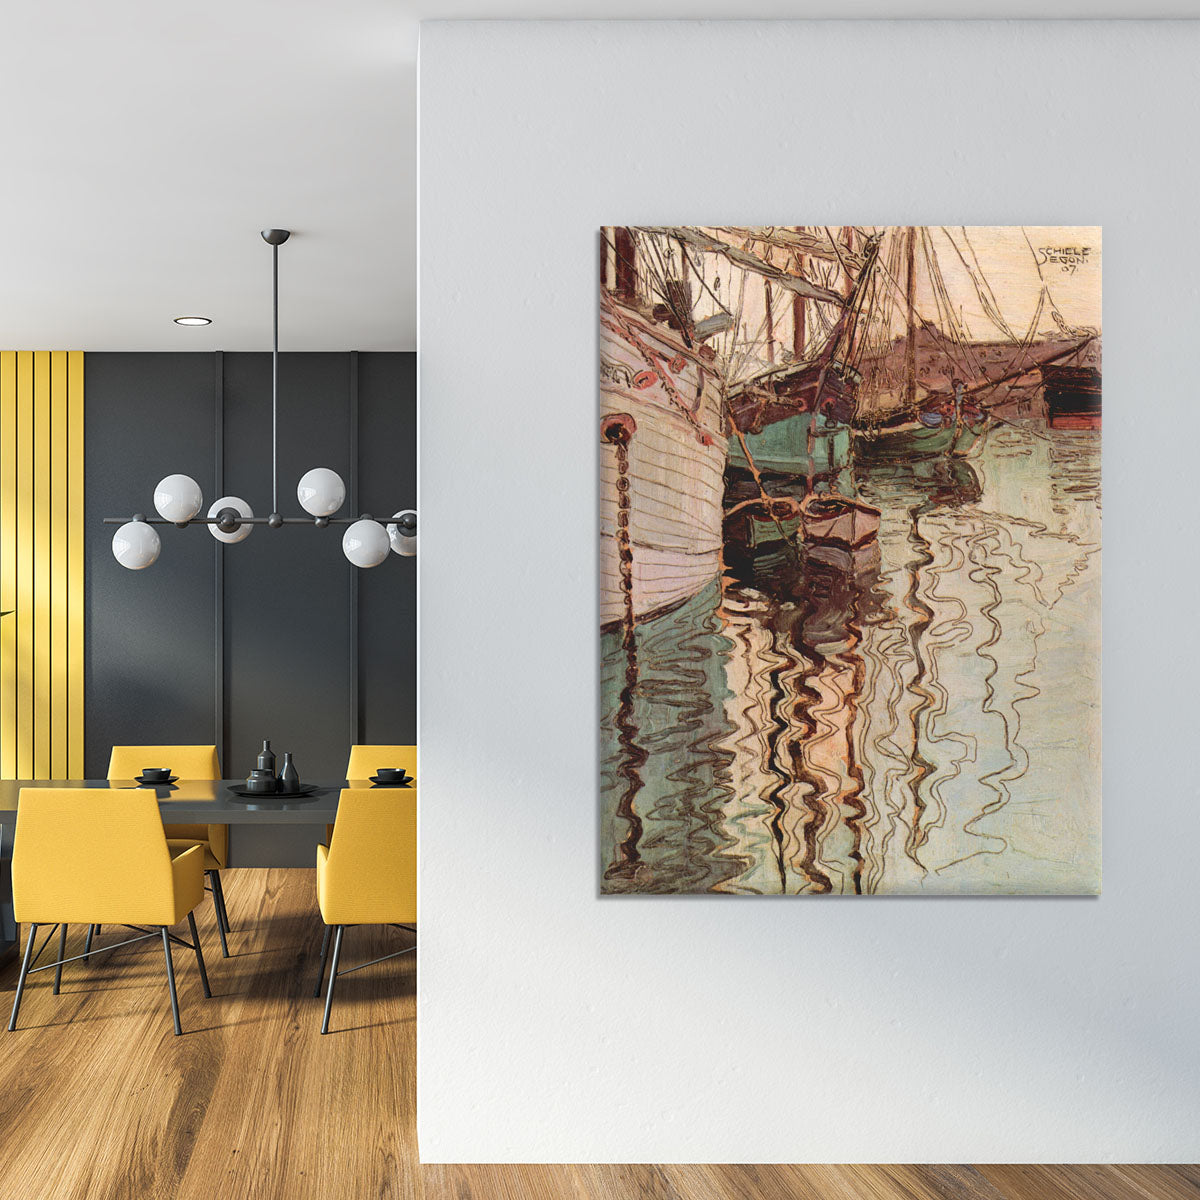 Sailboats in wellenbewegtem water The port of Trieste by Egon Schiele Canvas Print or Poster - Canvas Art Rocks - 4